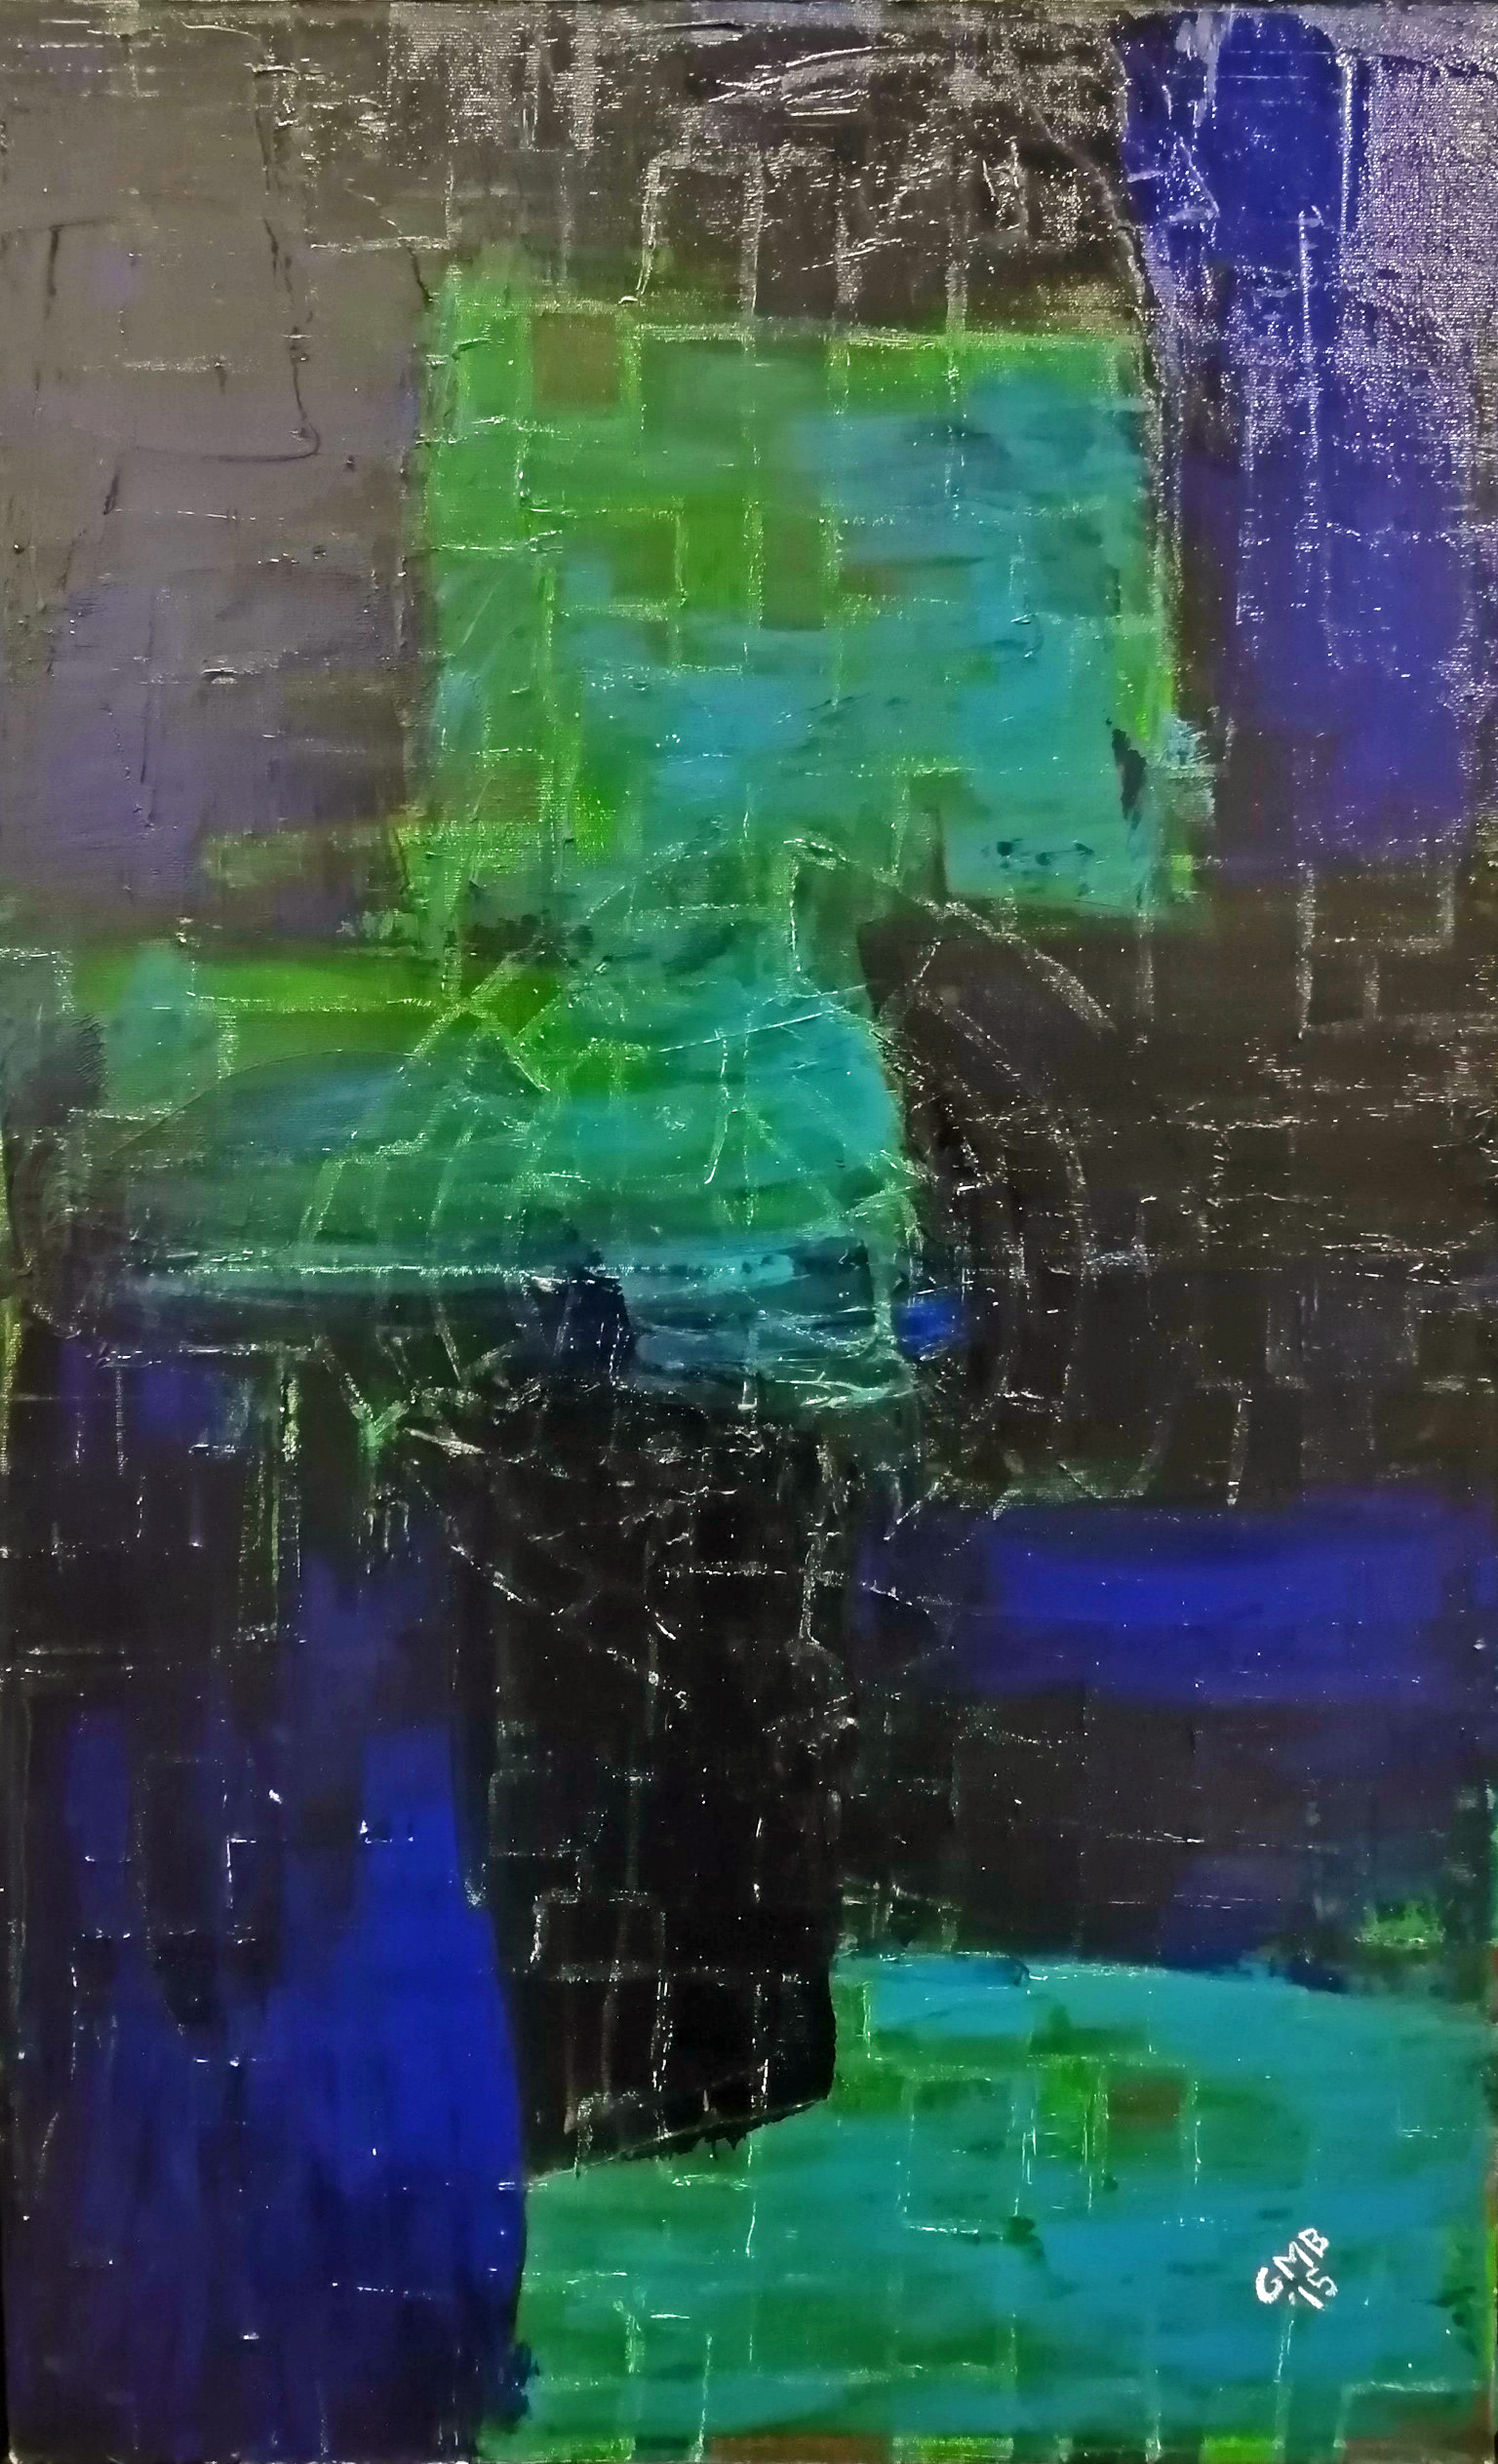 Head of Man is an abstract oil portrait painting using blues and greens.